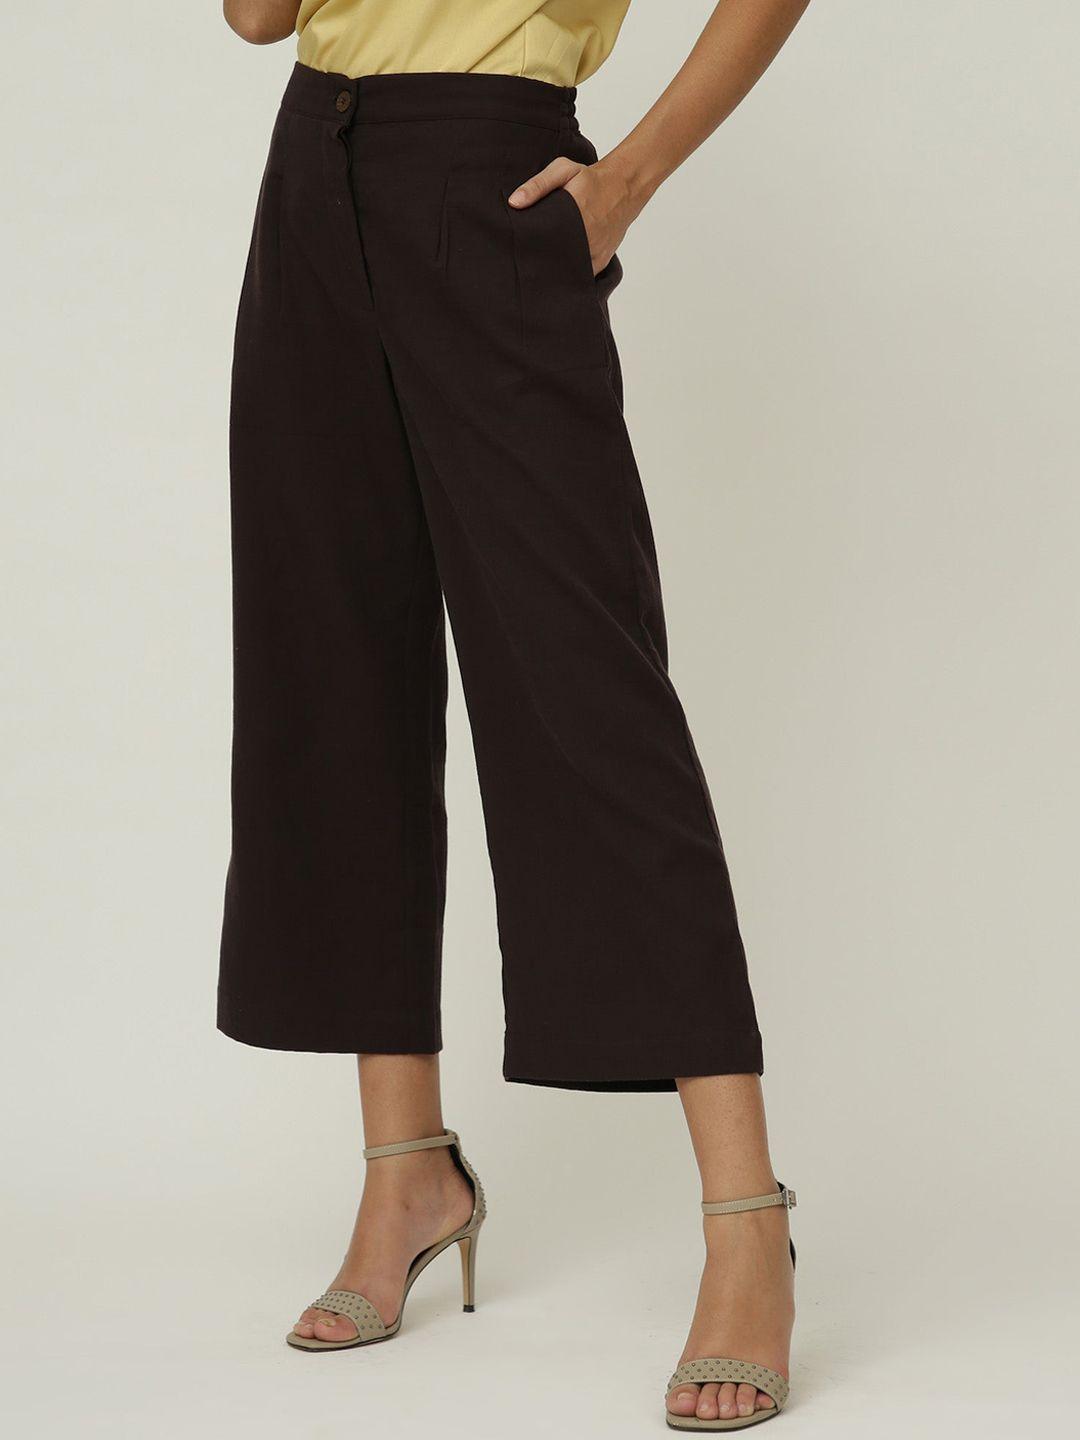 saltpetre women classic pleated culottes trousers